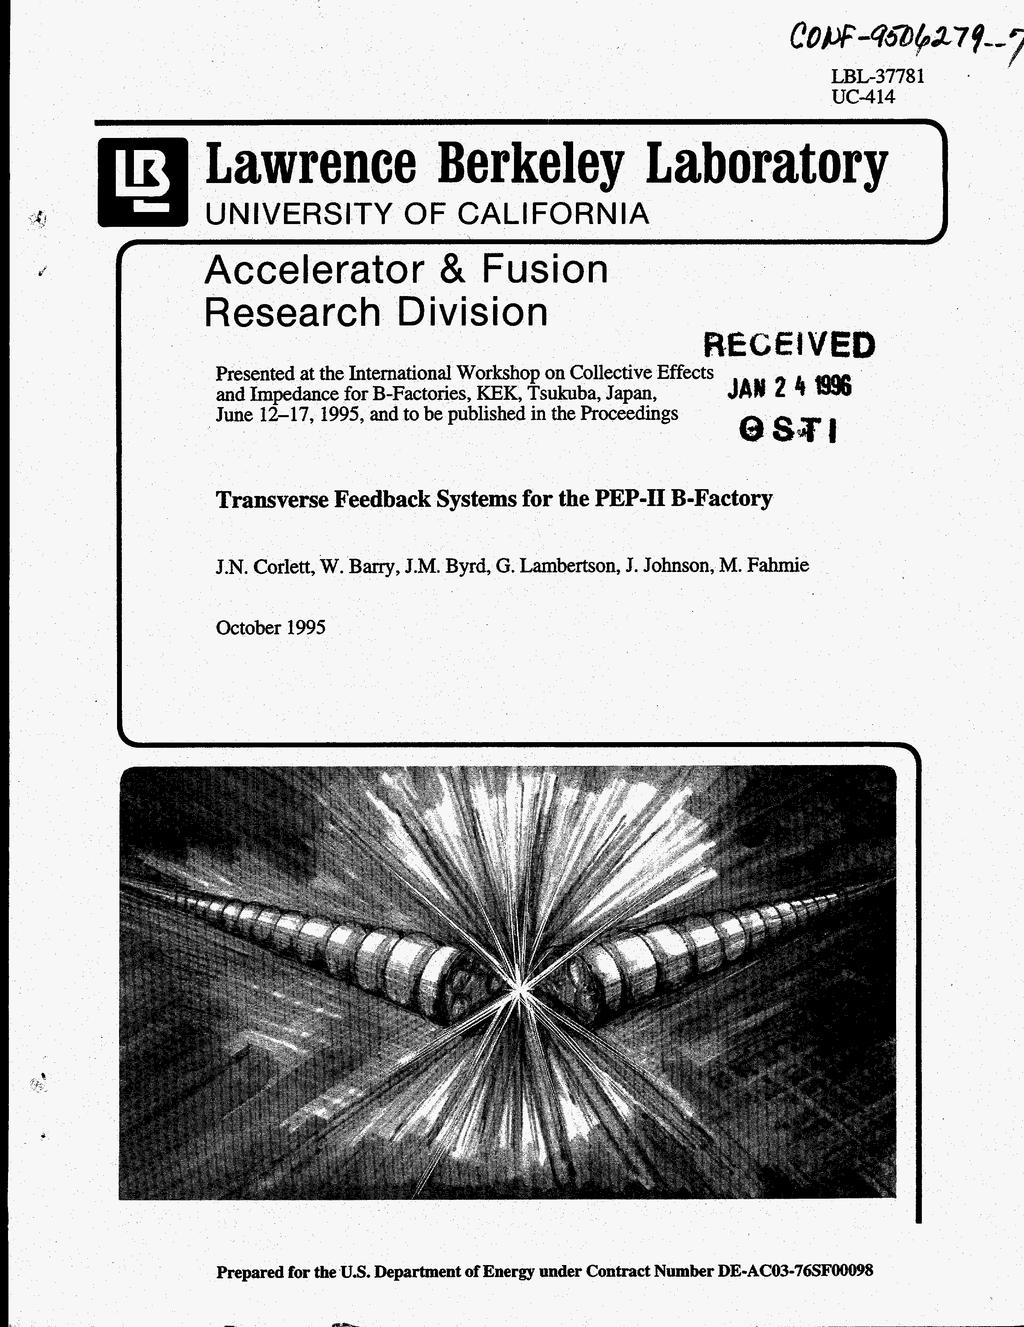 d e Lawrence Berkeley Laboratory UNIVERSITY OF CALIFORNIA Accelerator & Fusion Research Division I # RECEIVED Presented at the International Workshop on Collective Effects and Impedance for